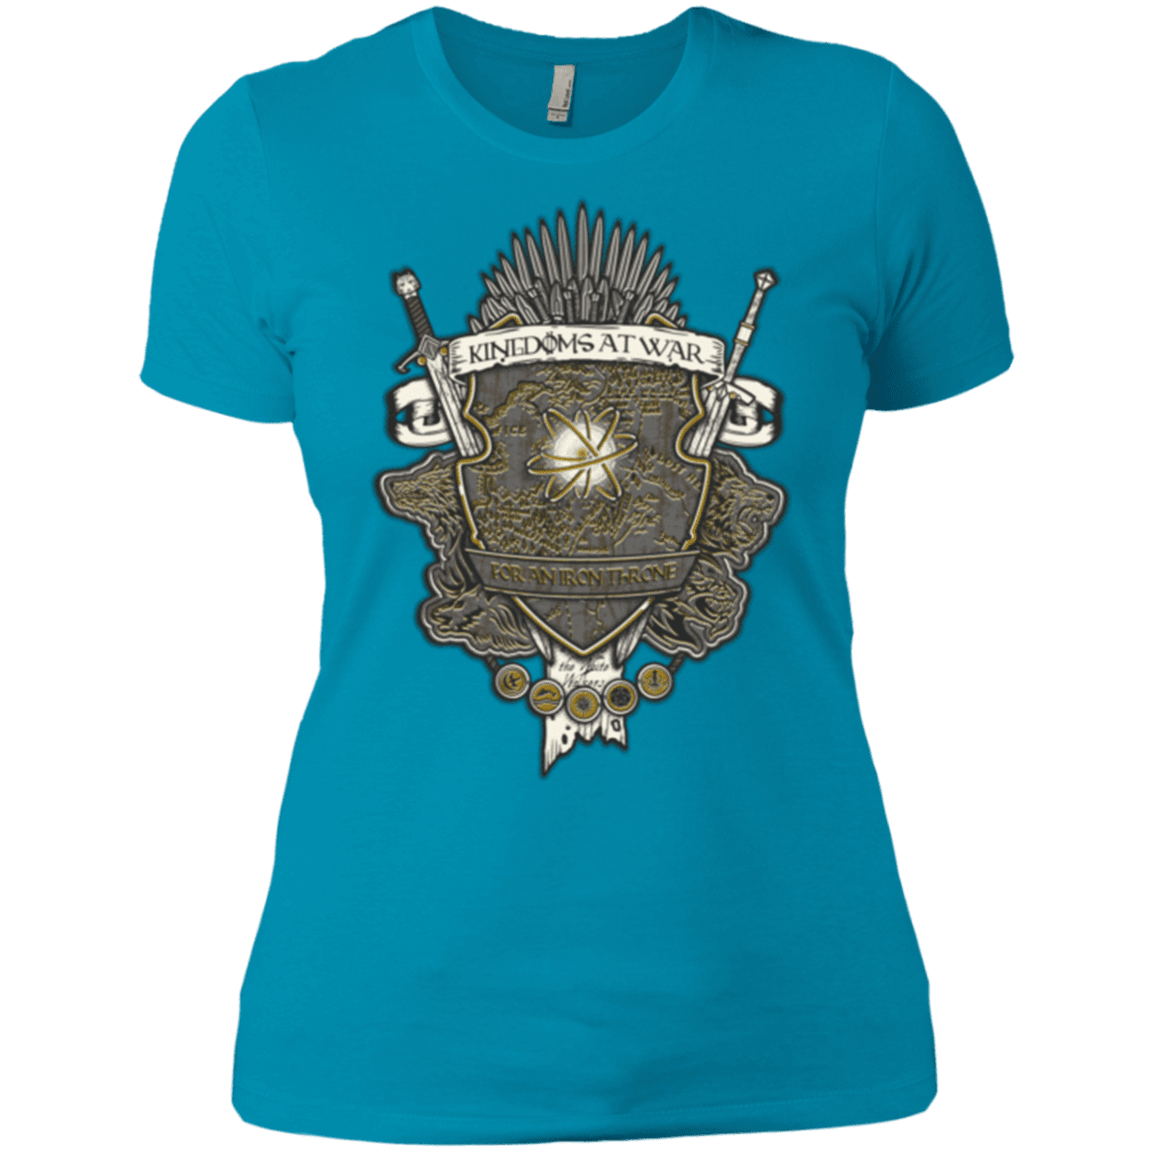 T-Shirts Turquoise / X-Small Crest of Thrones Women's Premium T-Shirt